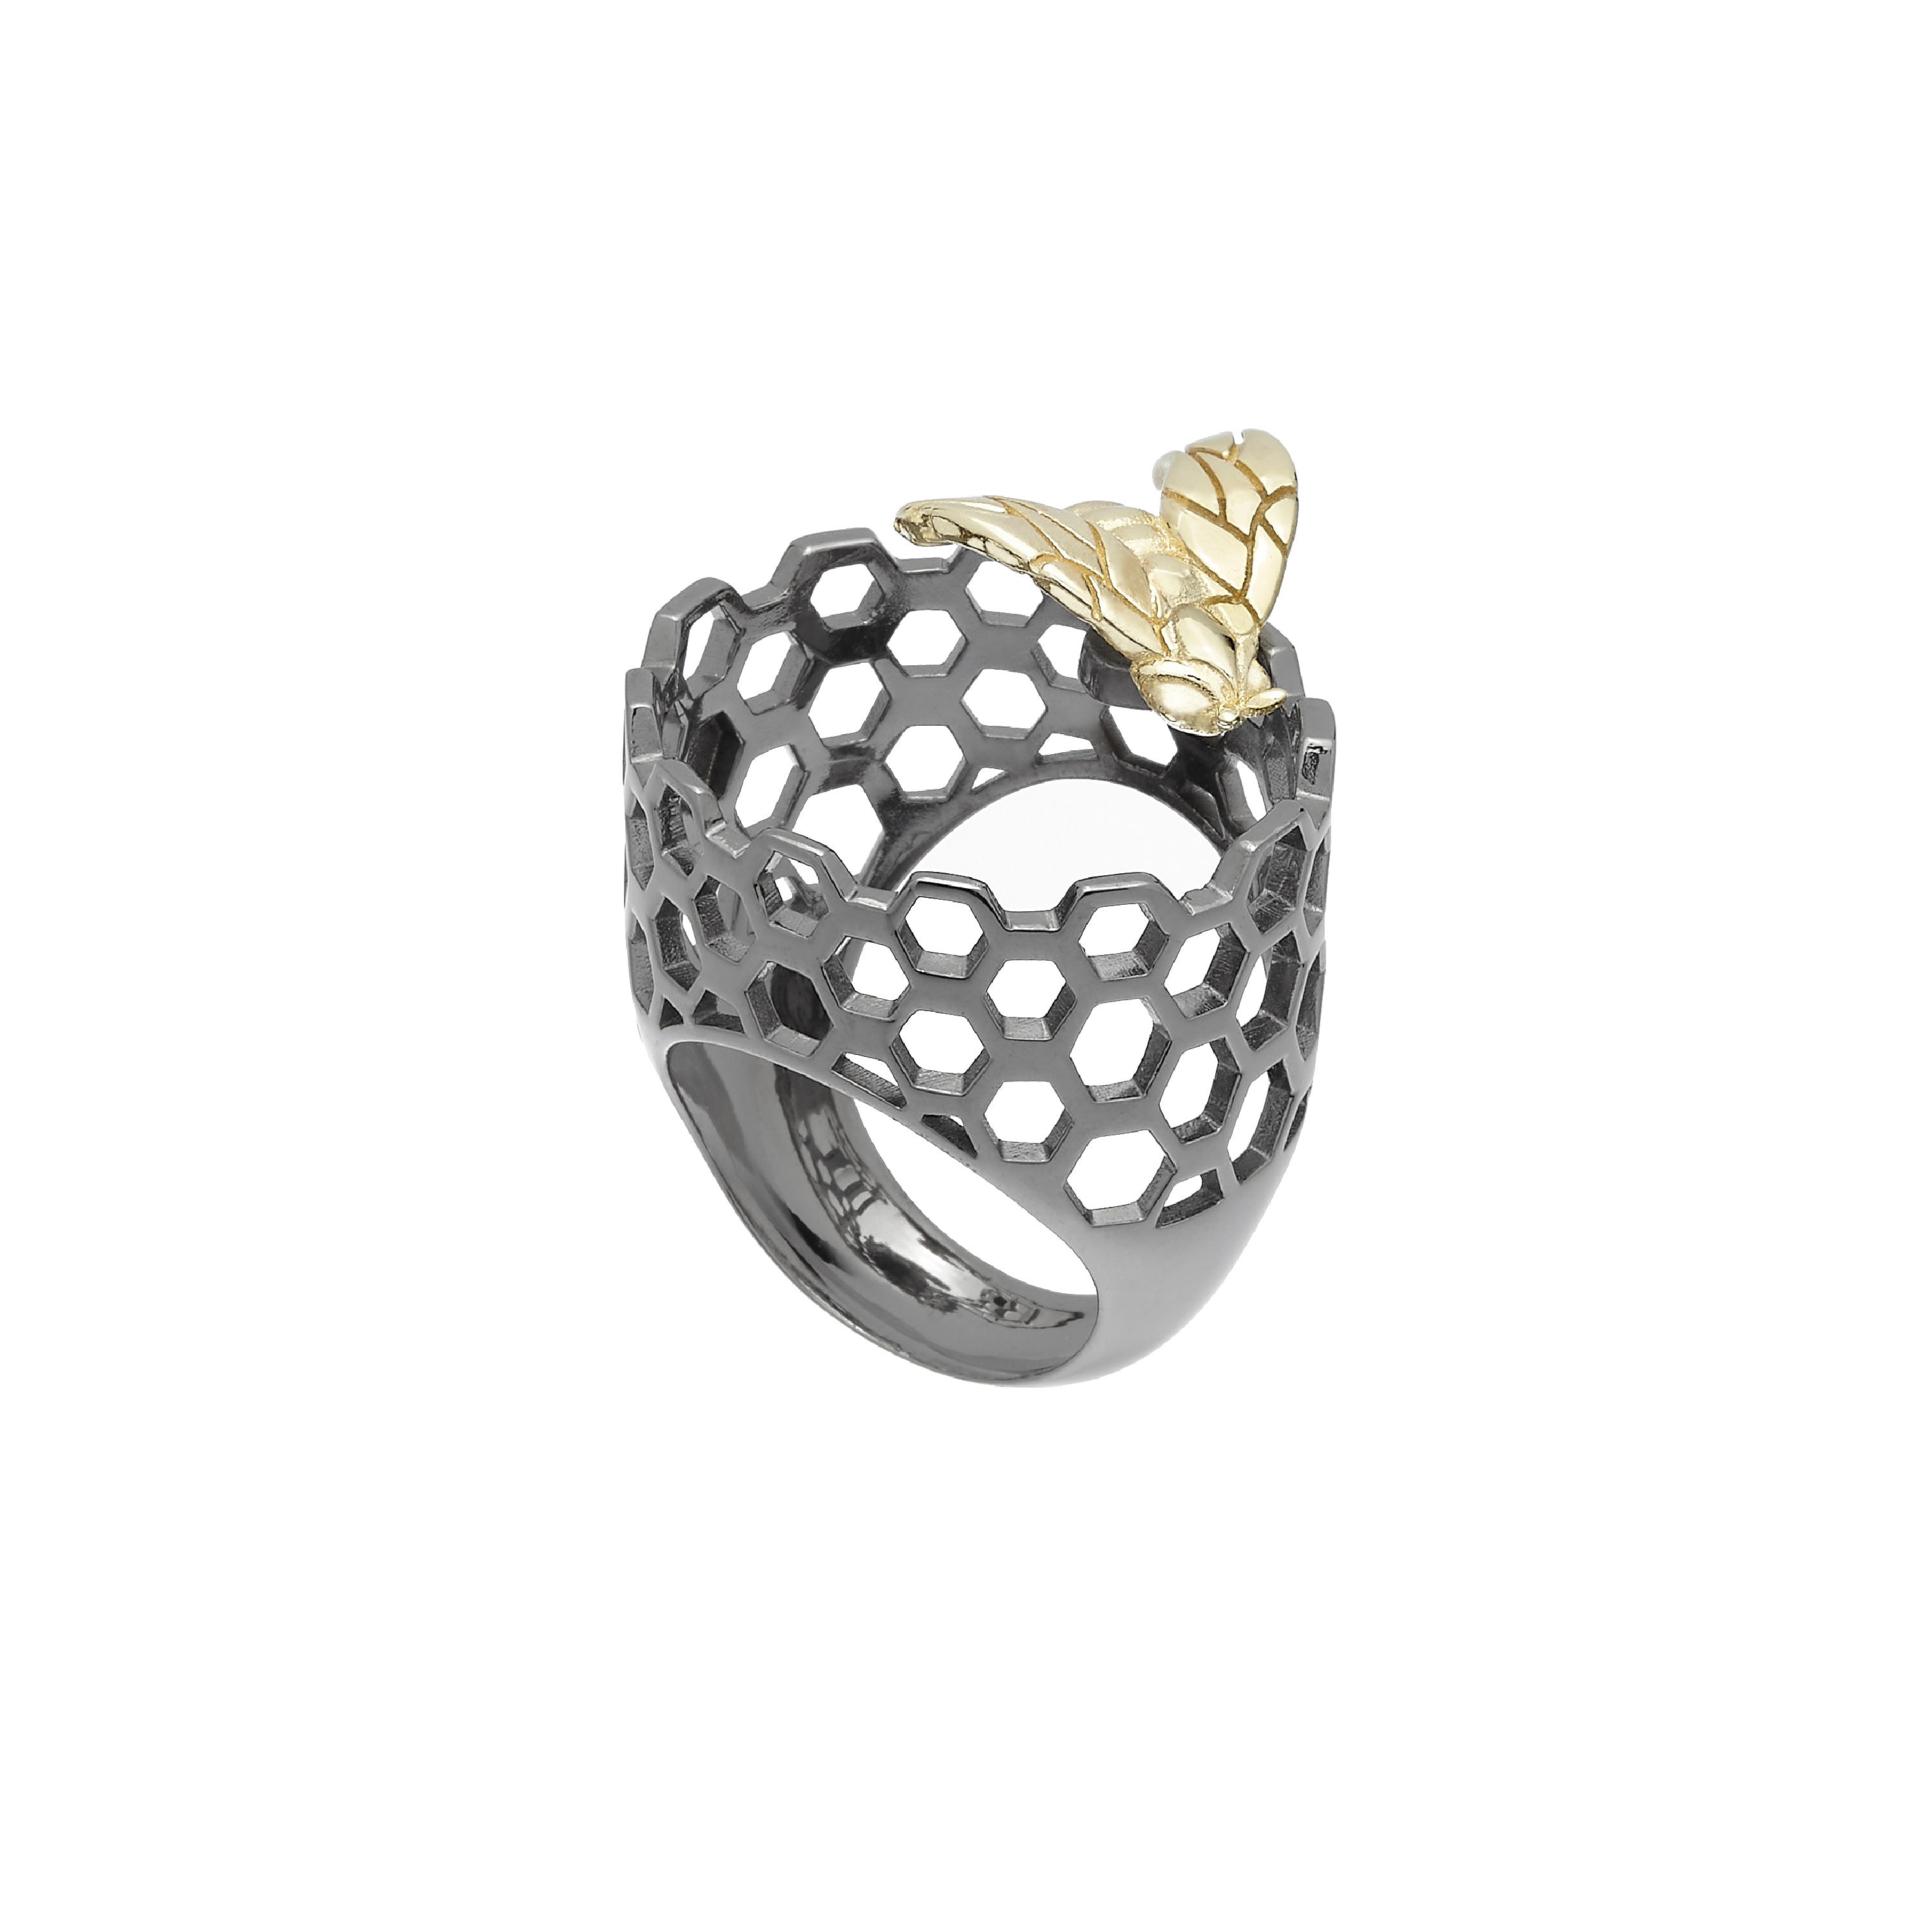 Bee Queen Hive Ring with Bee